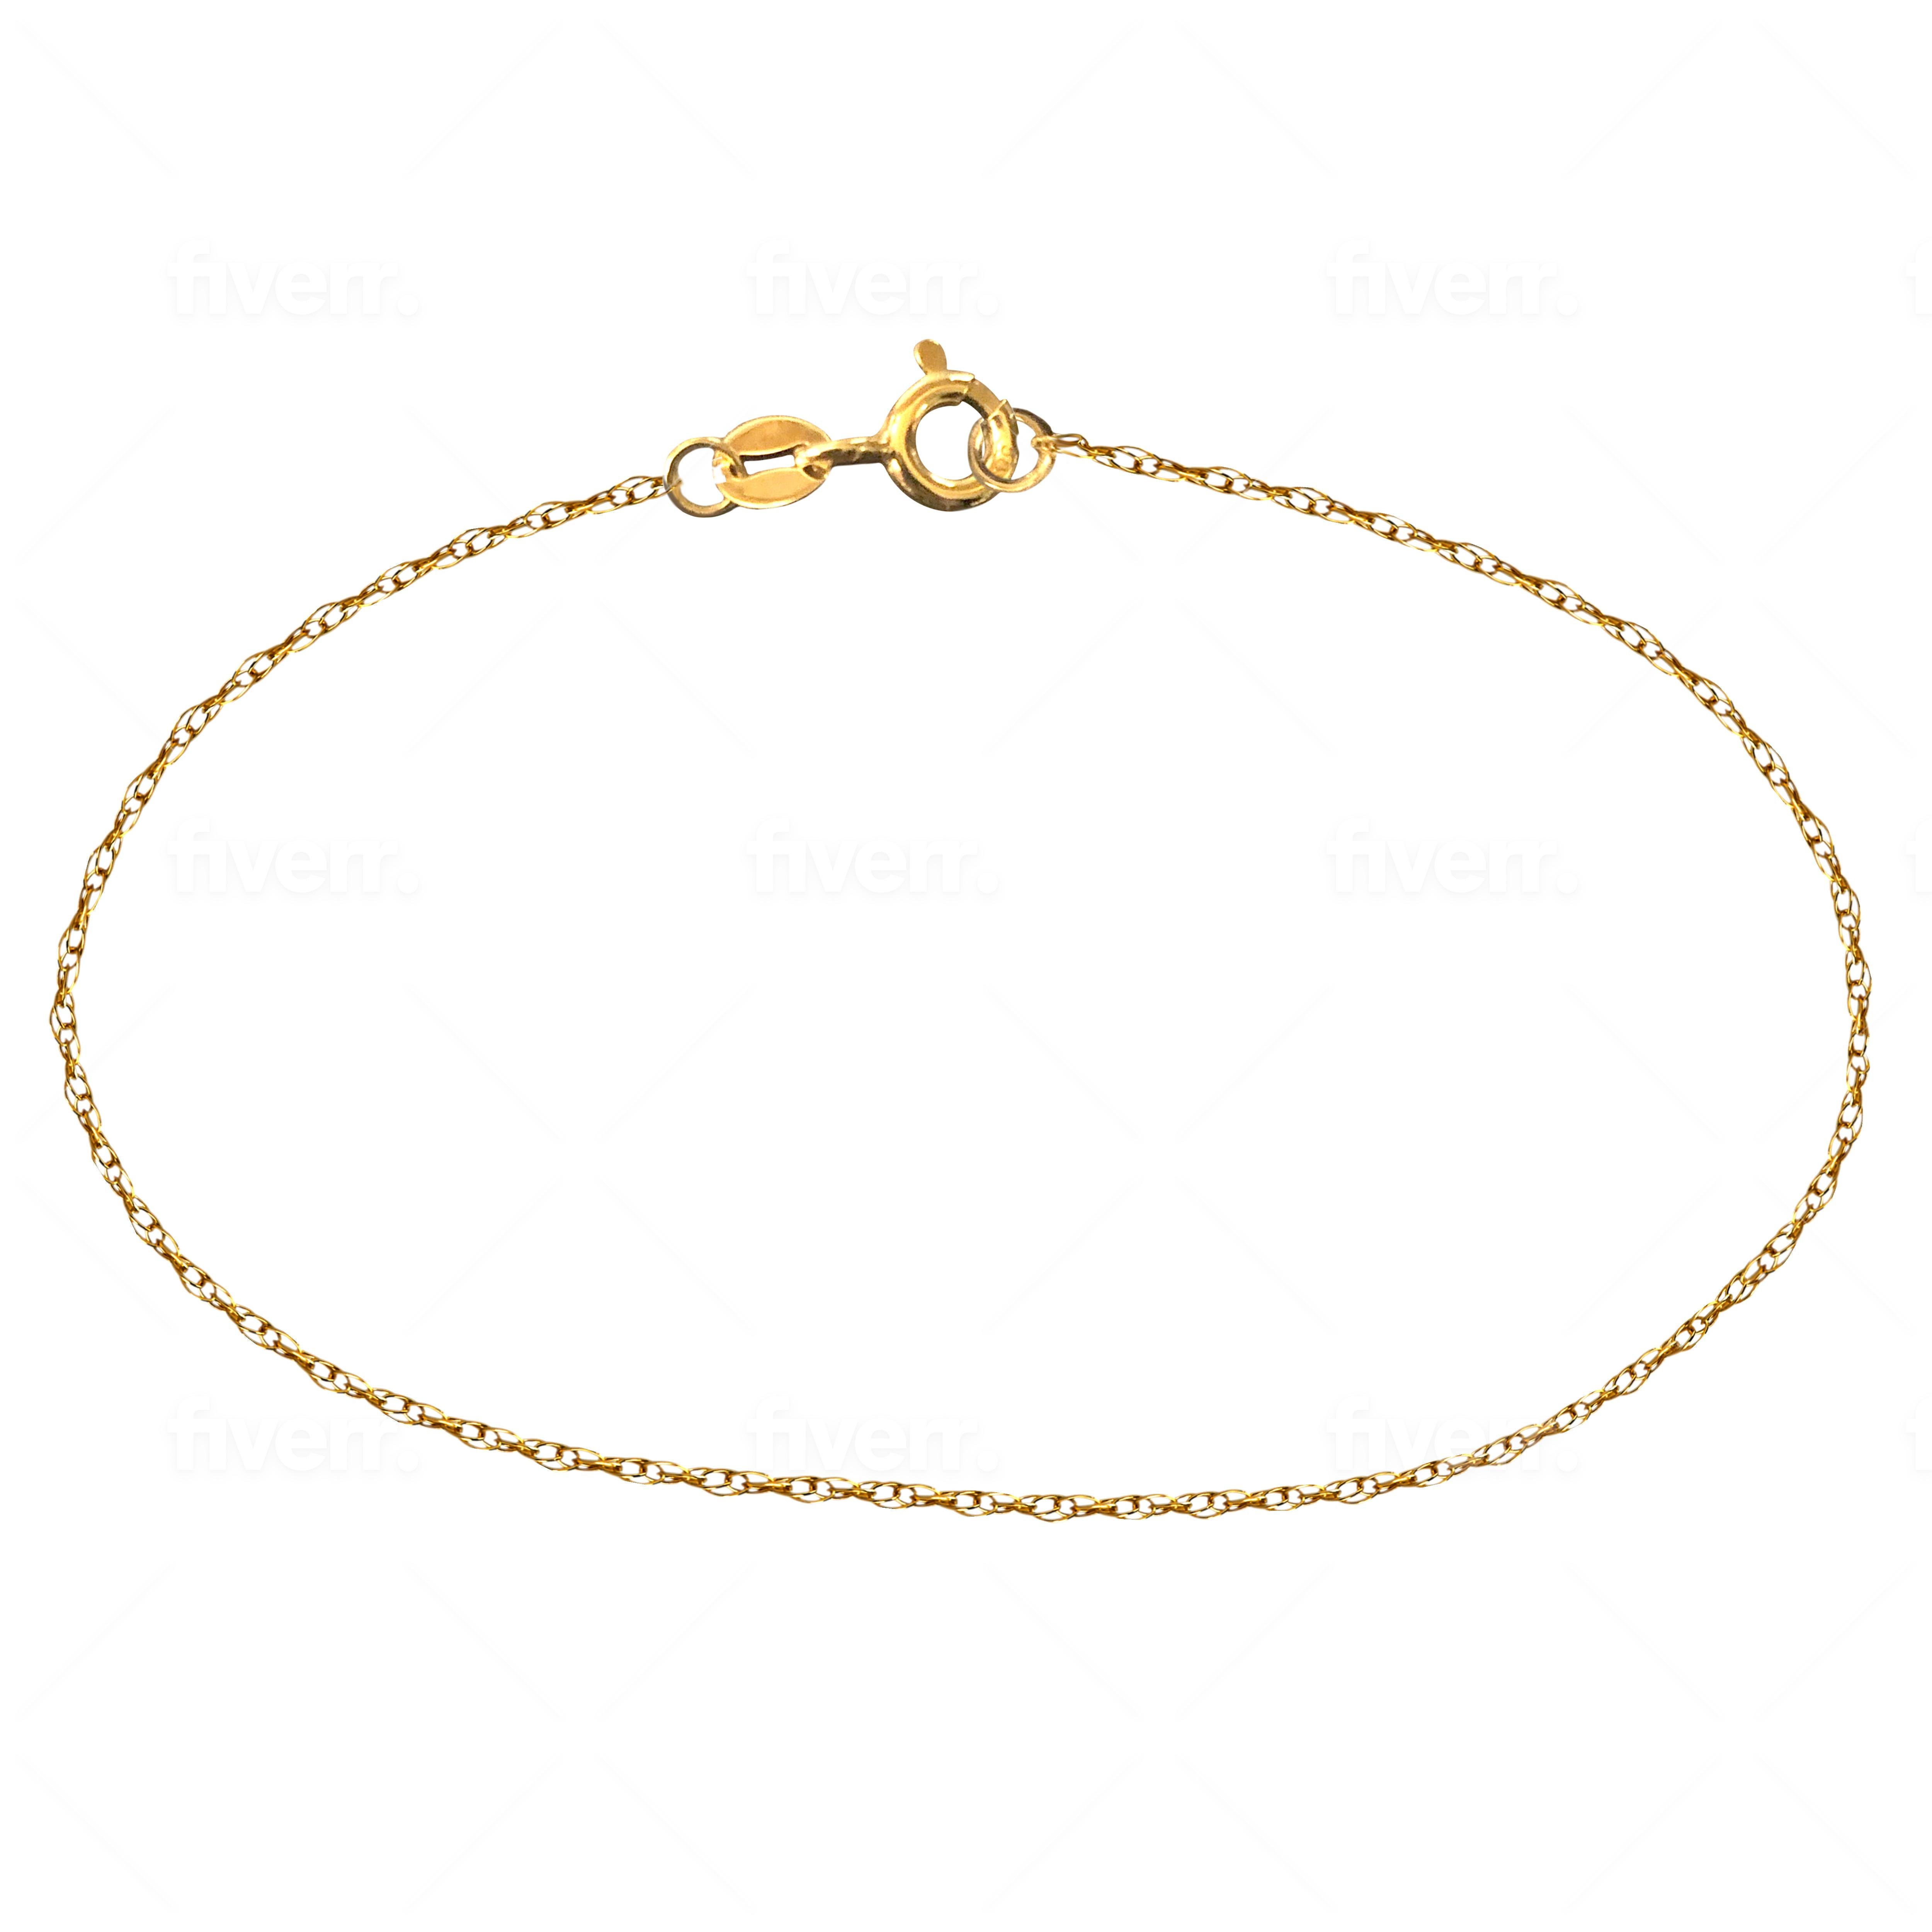 Classic Women's Real Solid 14K Yellow Gold Rope Bracelet. This genuine gold rope chain is 7 inches in length, approx. 0.50 grams in weight and 0.9mm wide.

This gold rope bracelet is genuine and comes stamped solid 14K gold.

We only offer real gold